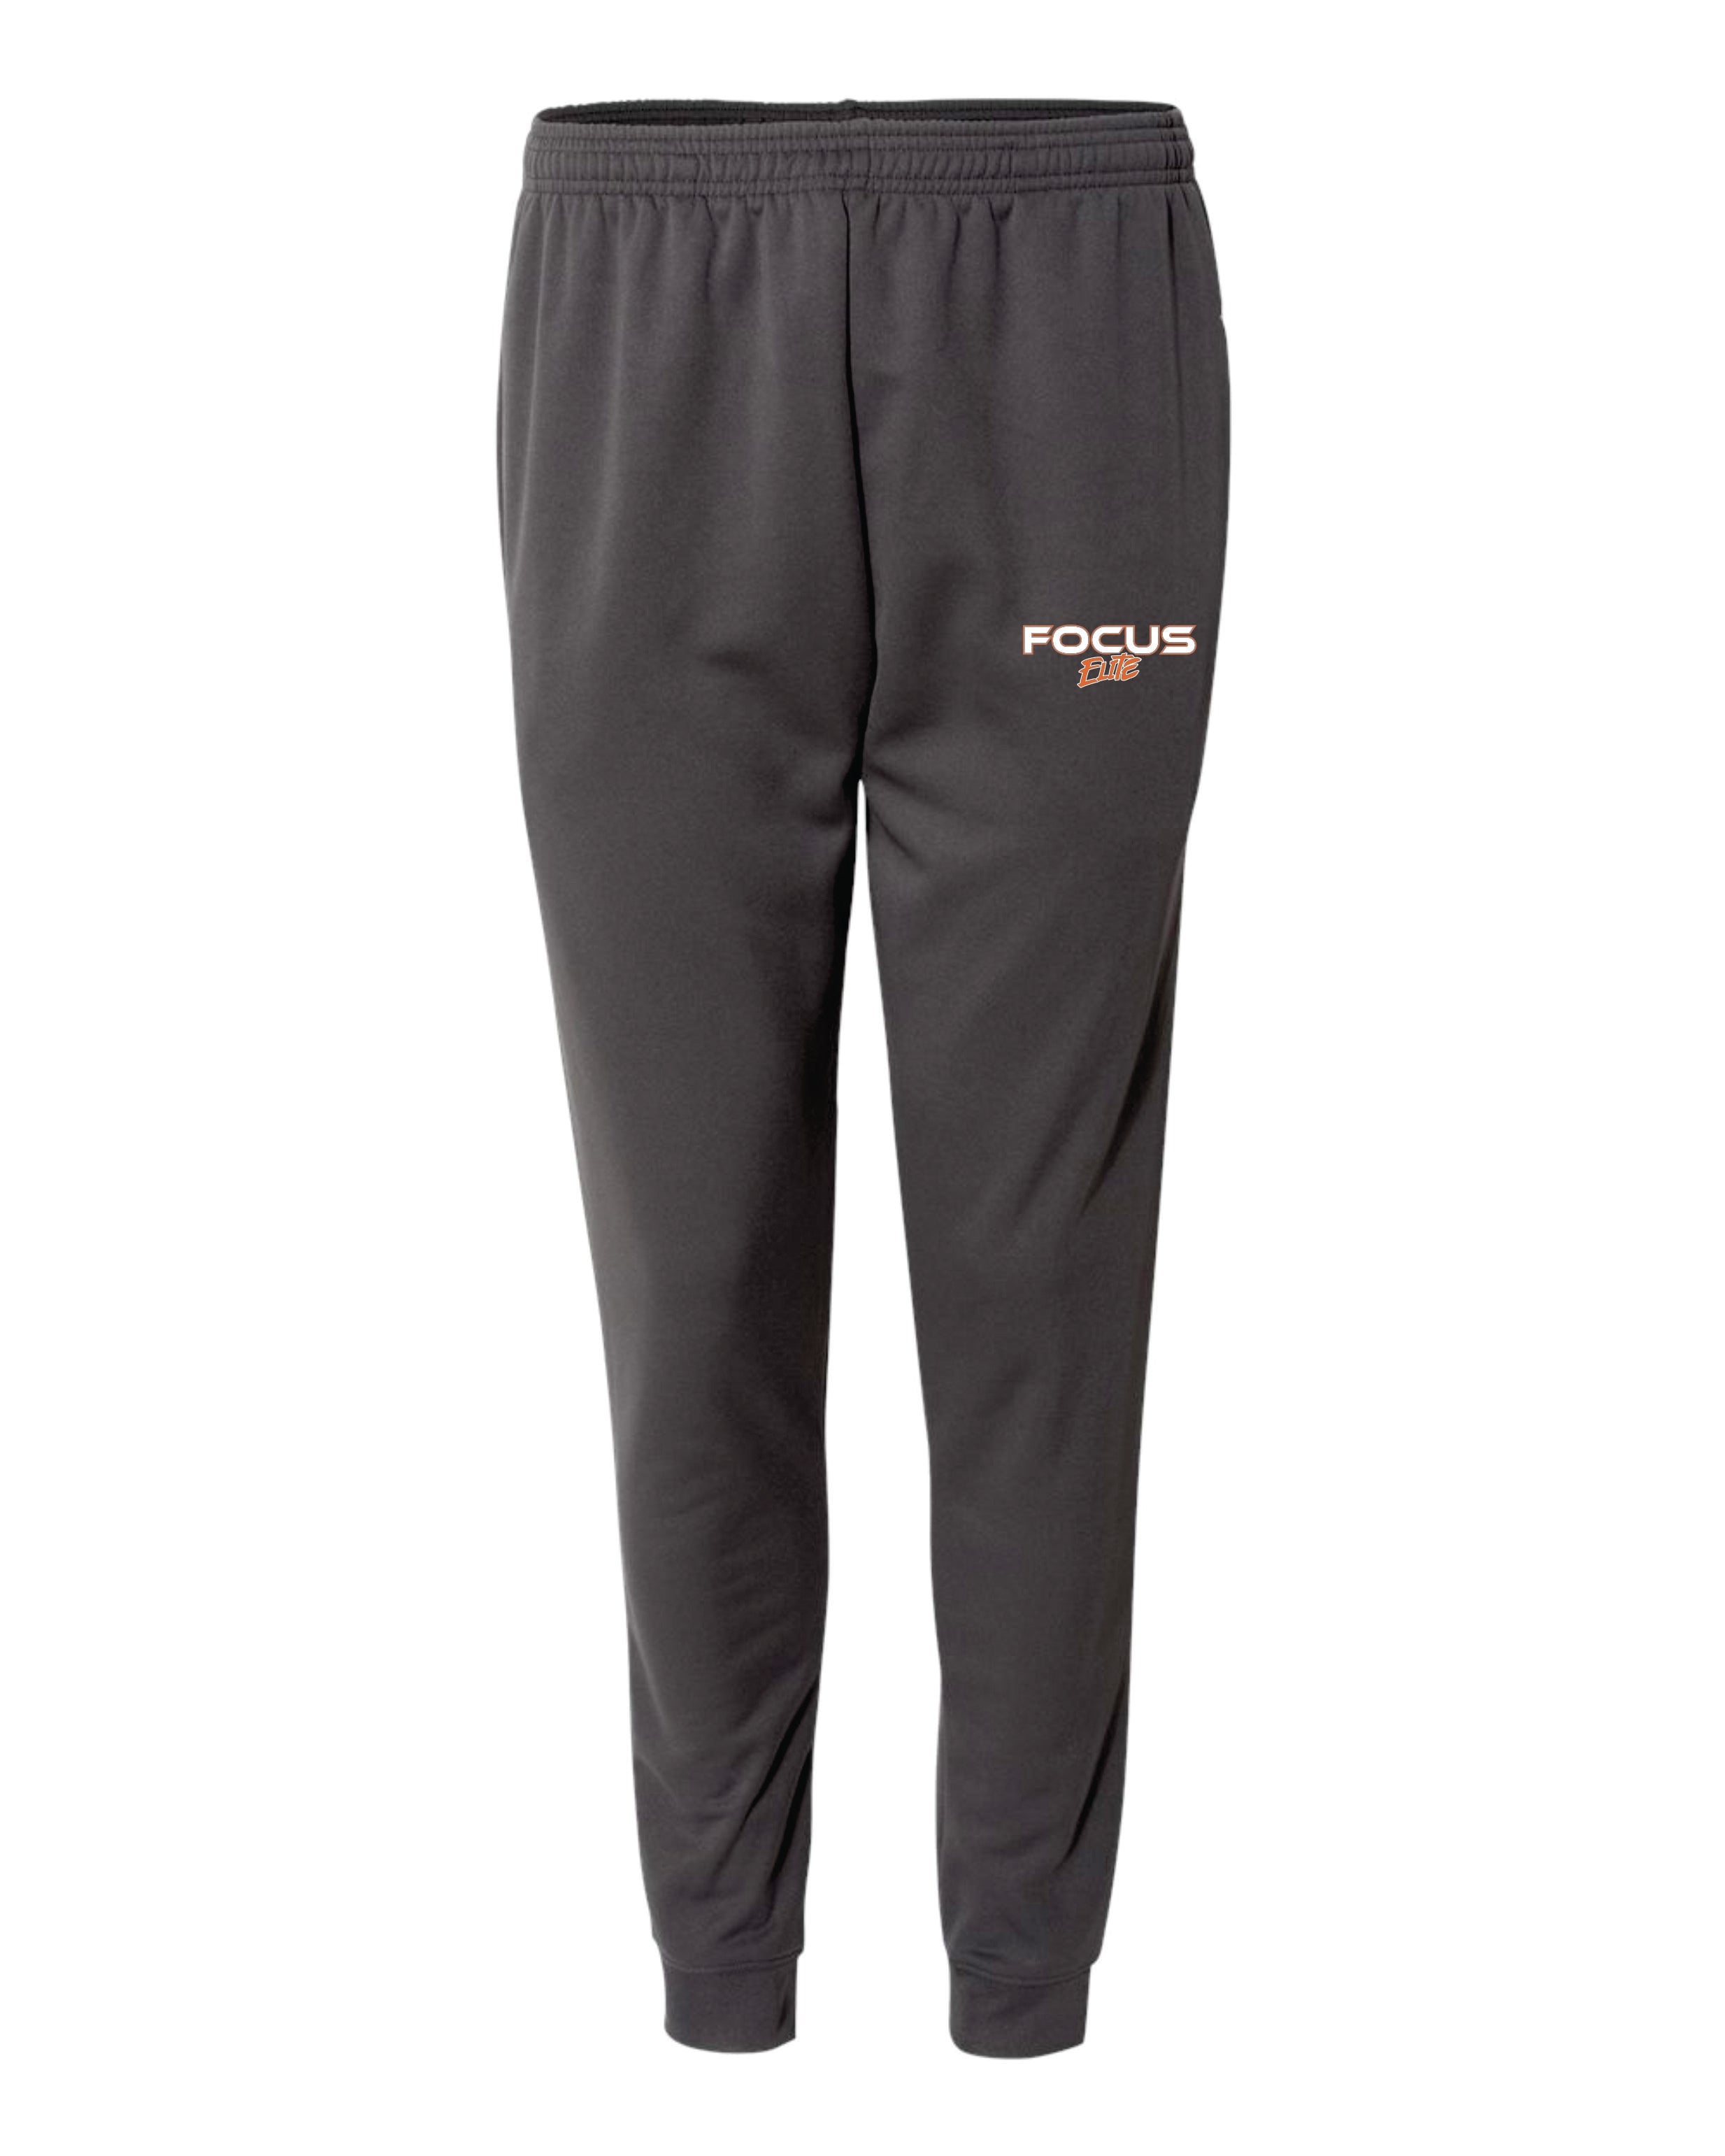 Focus Joggers by Badger - Women